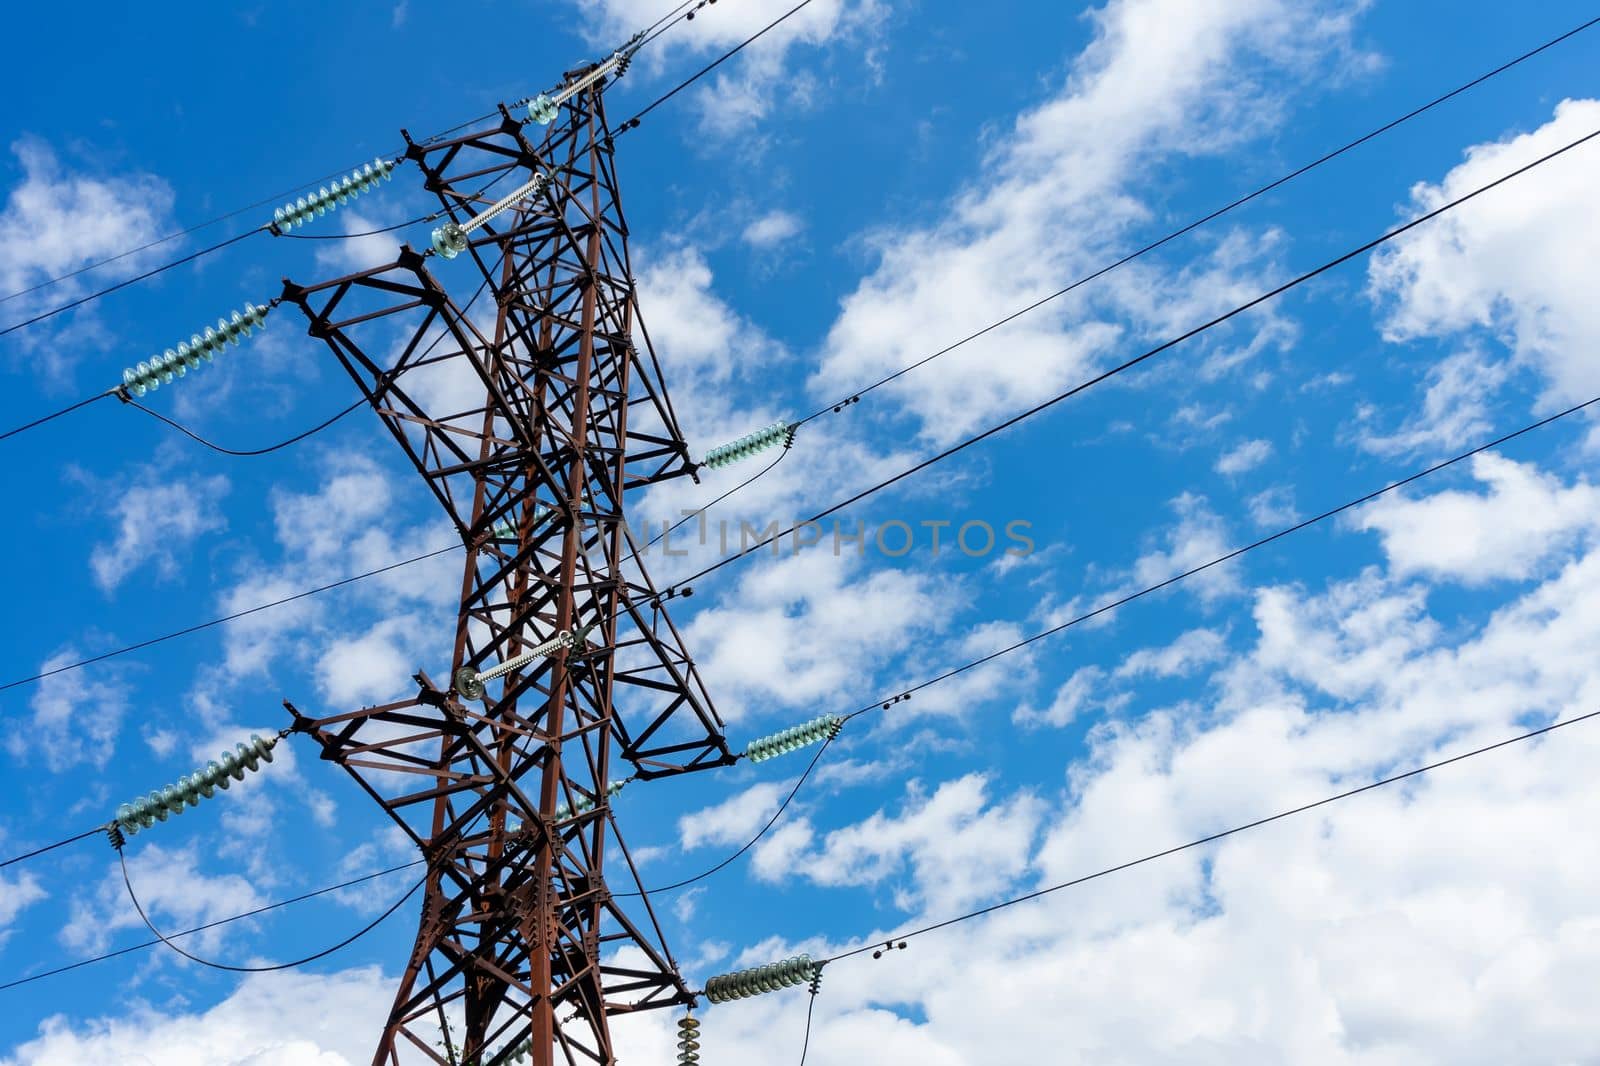 A pole of a high-voltage electric line on the background of a blue sky with white clouds. by Serhii_Voroshchuk